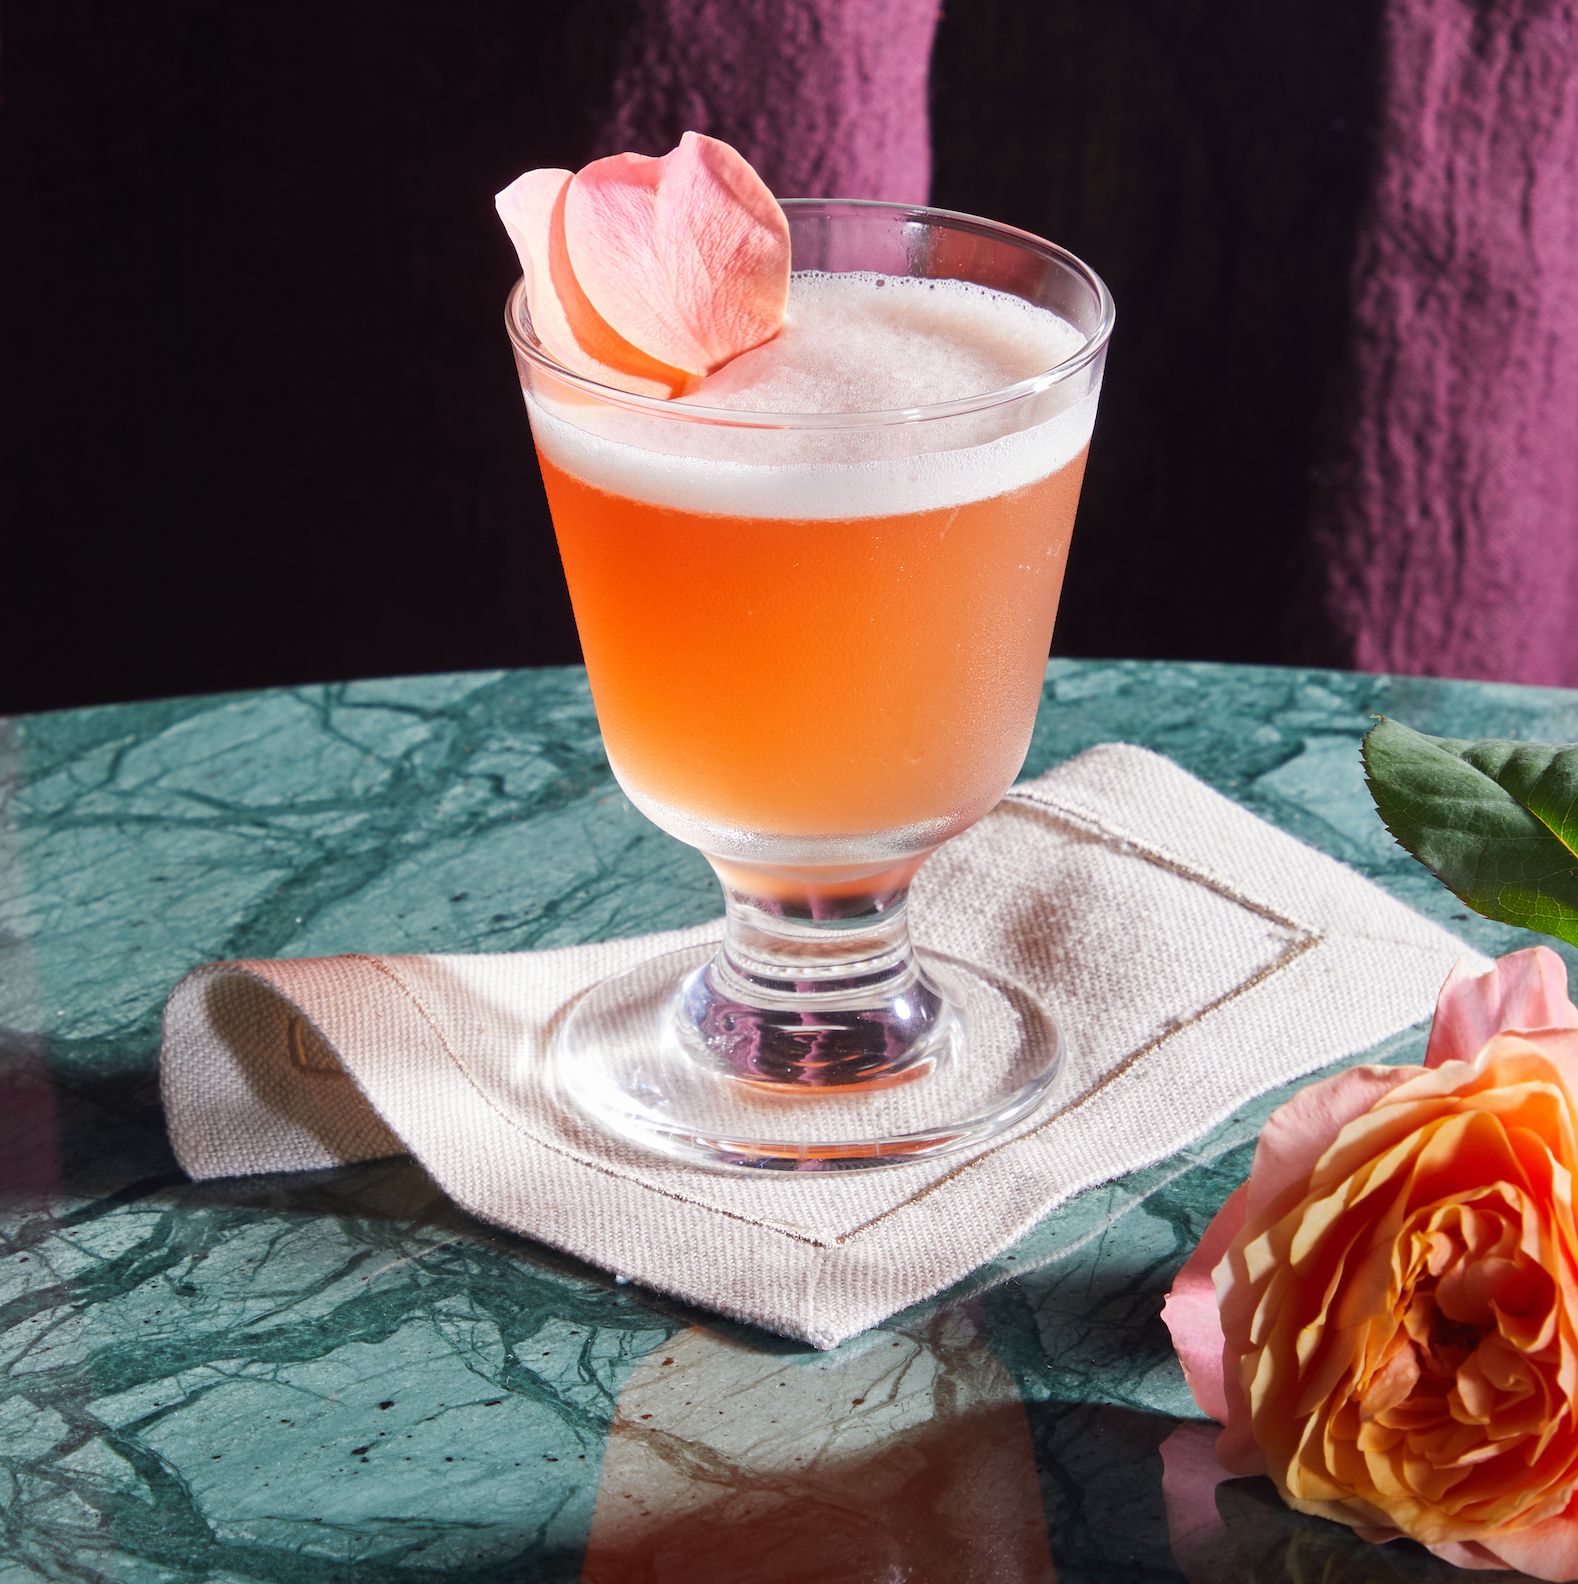 13 Valentine's Day Cocktails That'll Make You Fall in Love All Over Again